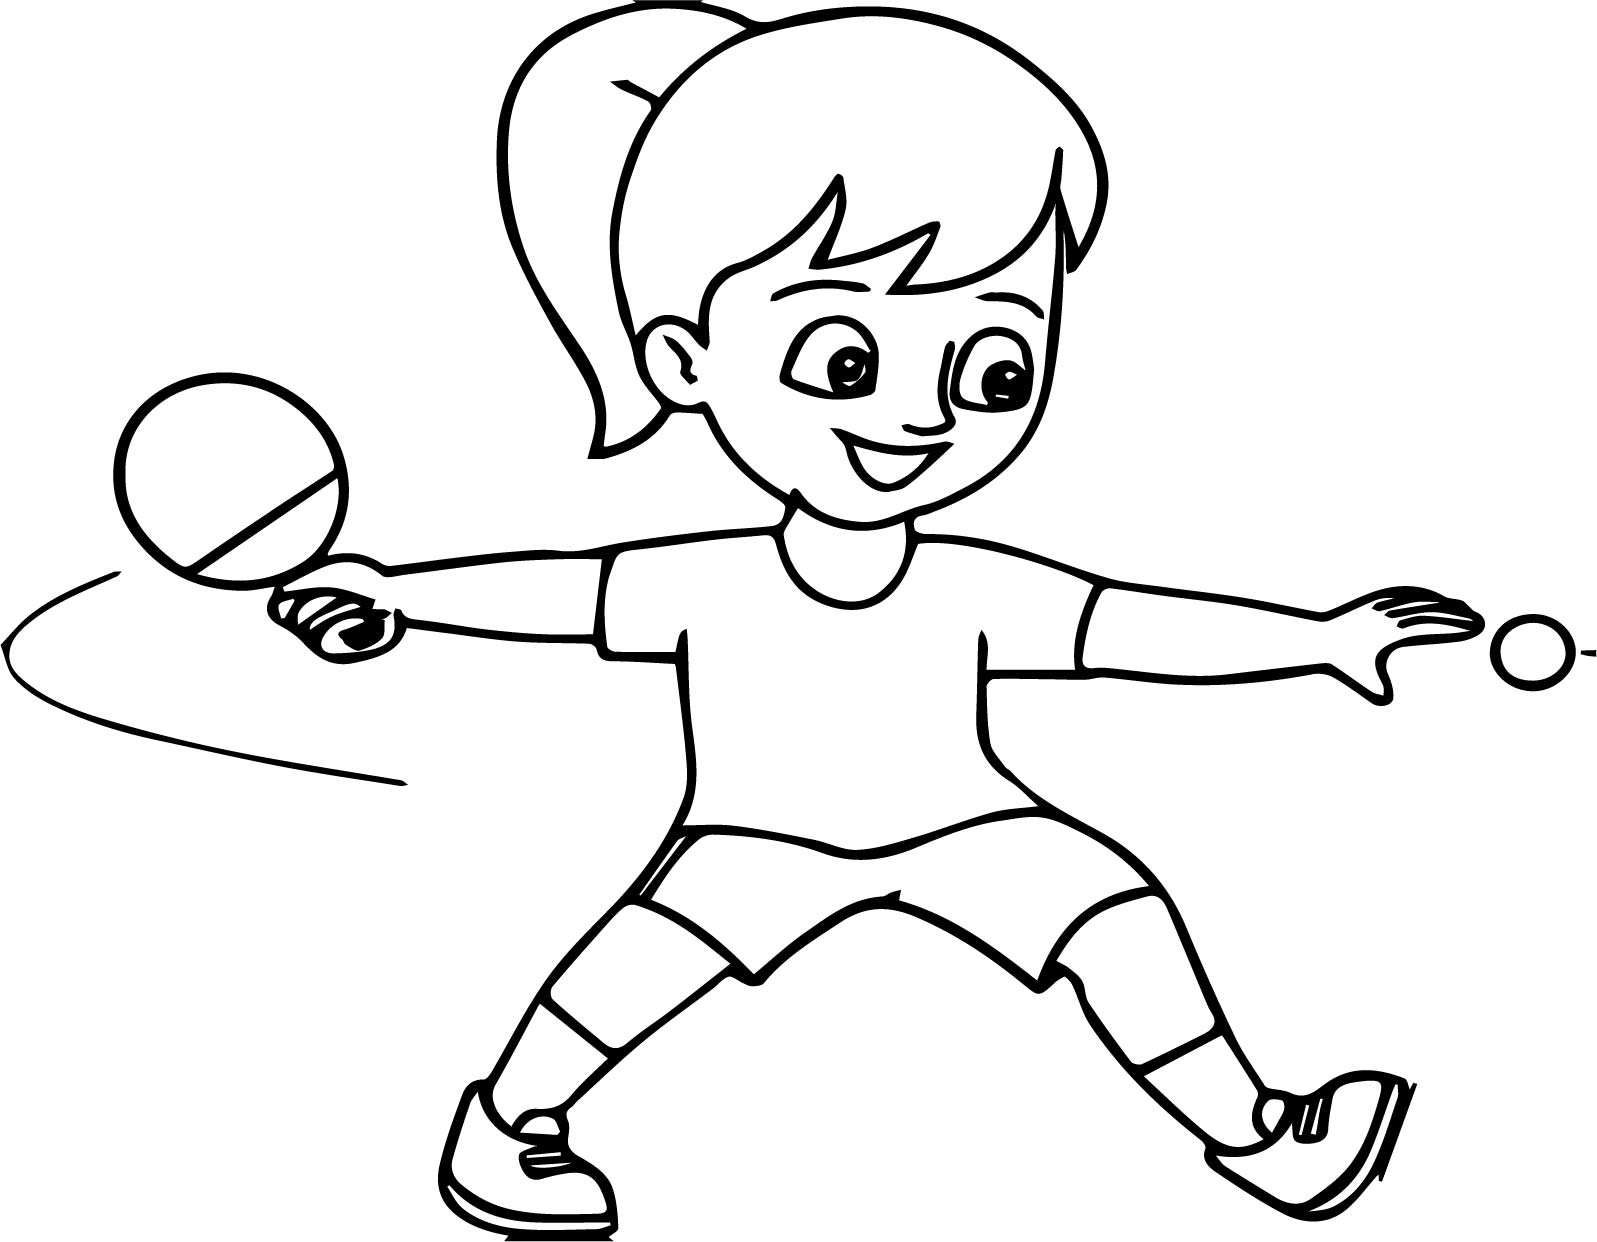 racketlhon coloring pages for kids